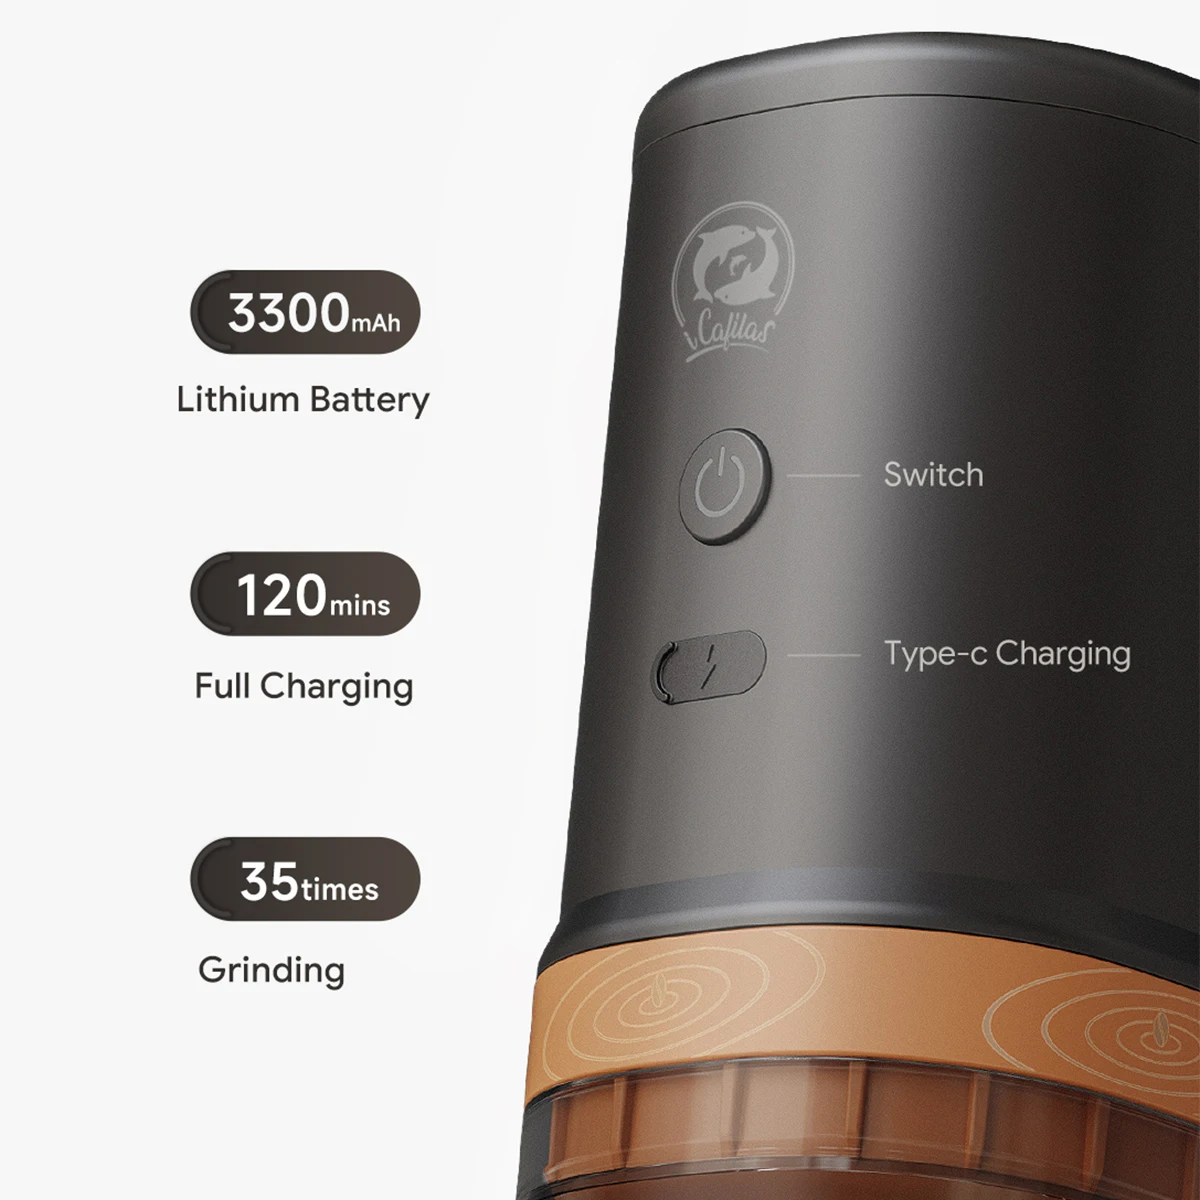  Portable Electric Burr Coffee Grinder: CONQUECO Small